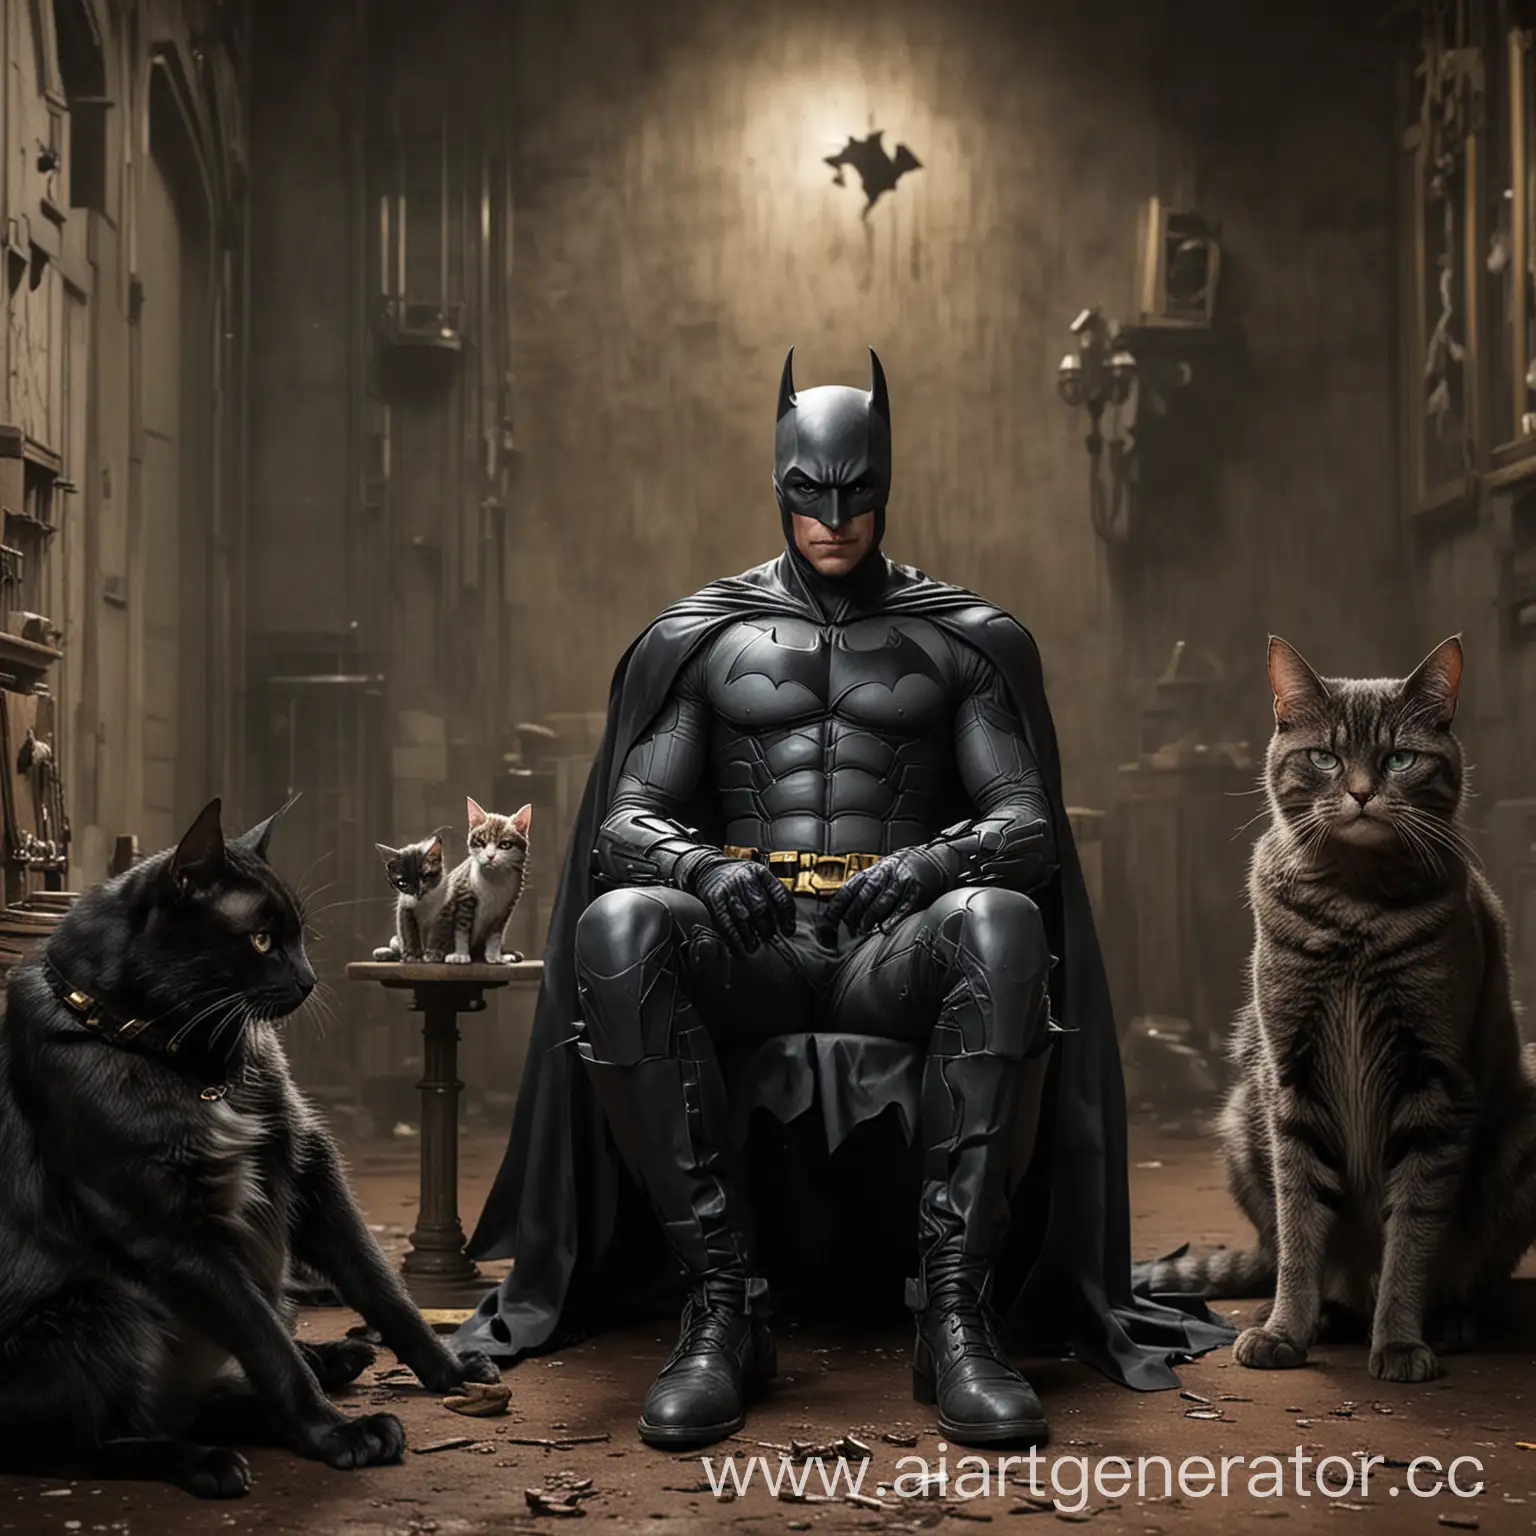 Batman sits with cats and chats with Joker